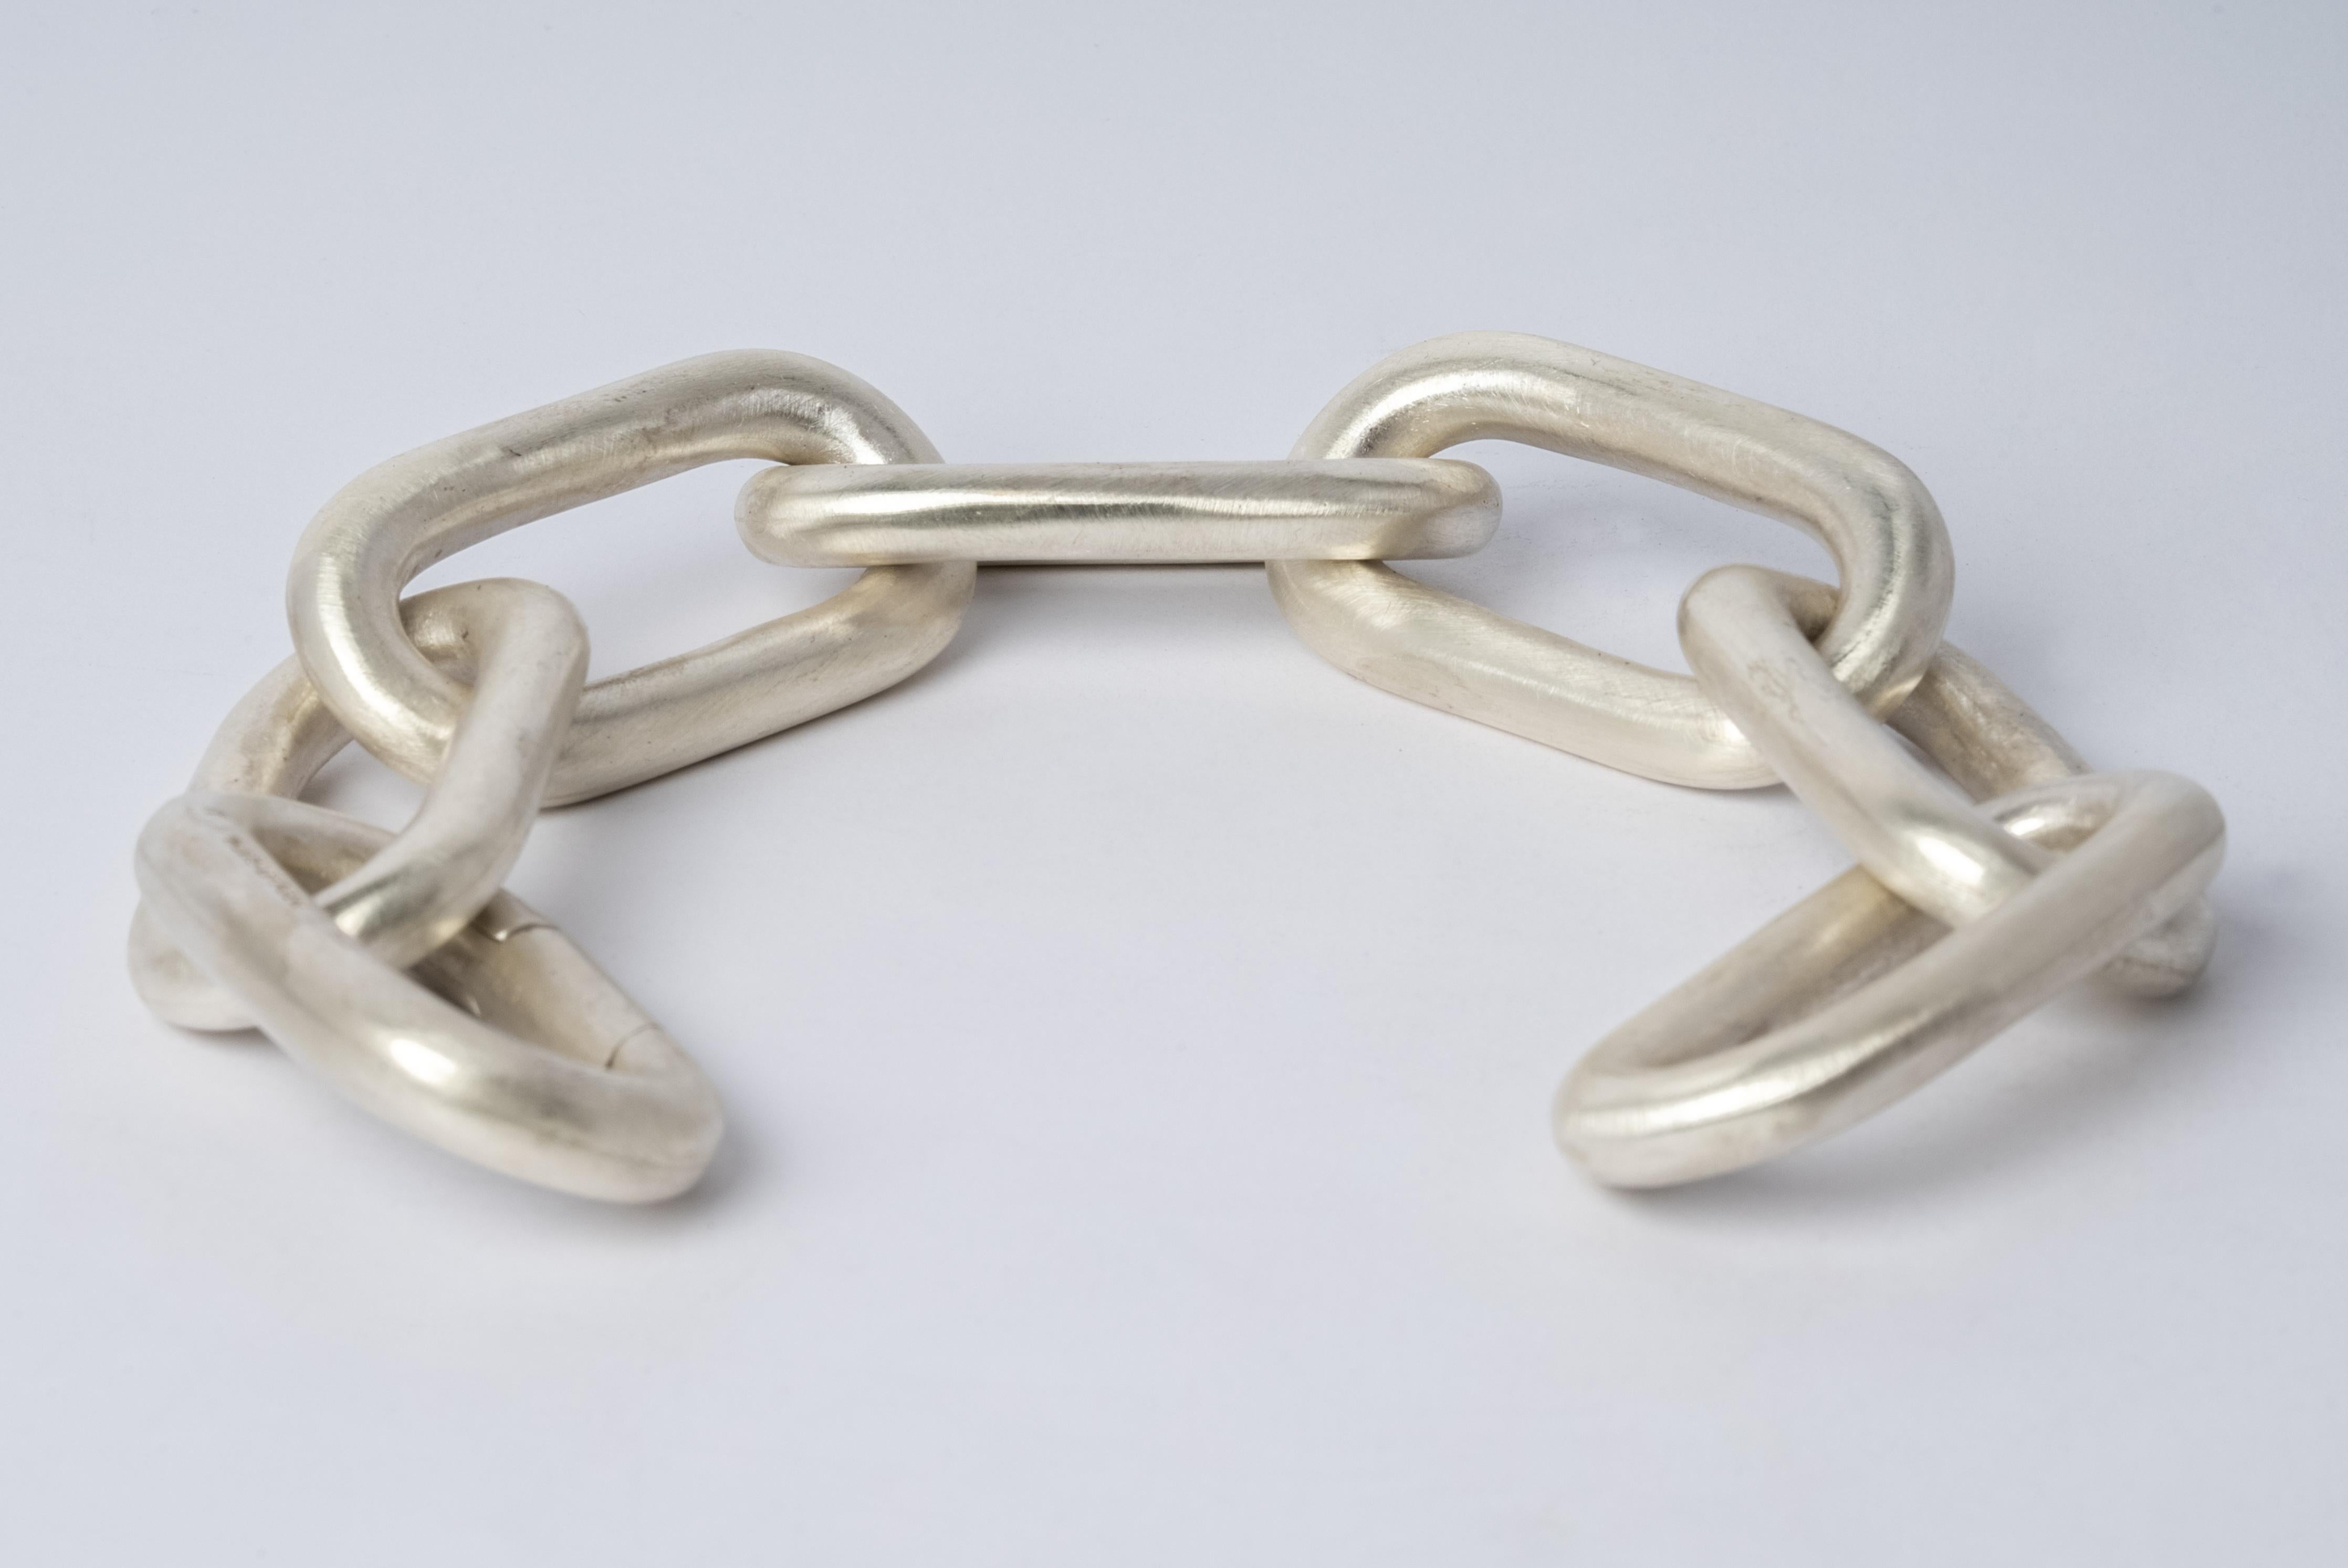 Bracelet in matte sterling silver. This piece is 100% hand fabricated from metal plate; cut into sections and soldered together to make the hollow three dimensional form. Dimensions of Chain link size (L × H): 50 mm × 25 mm.